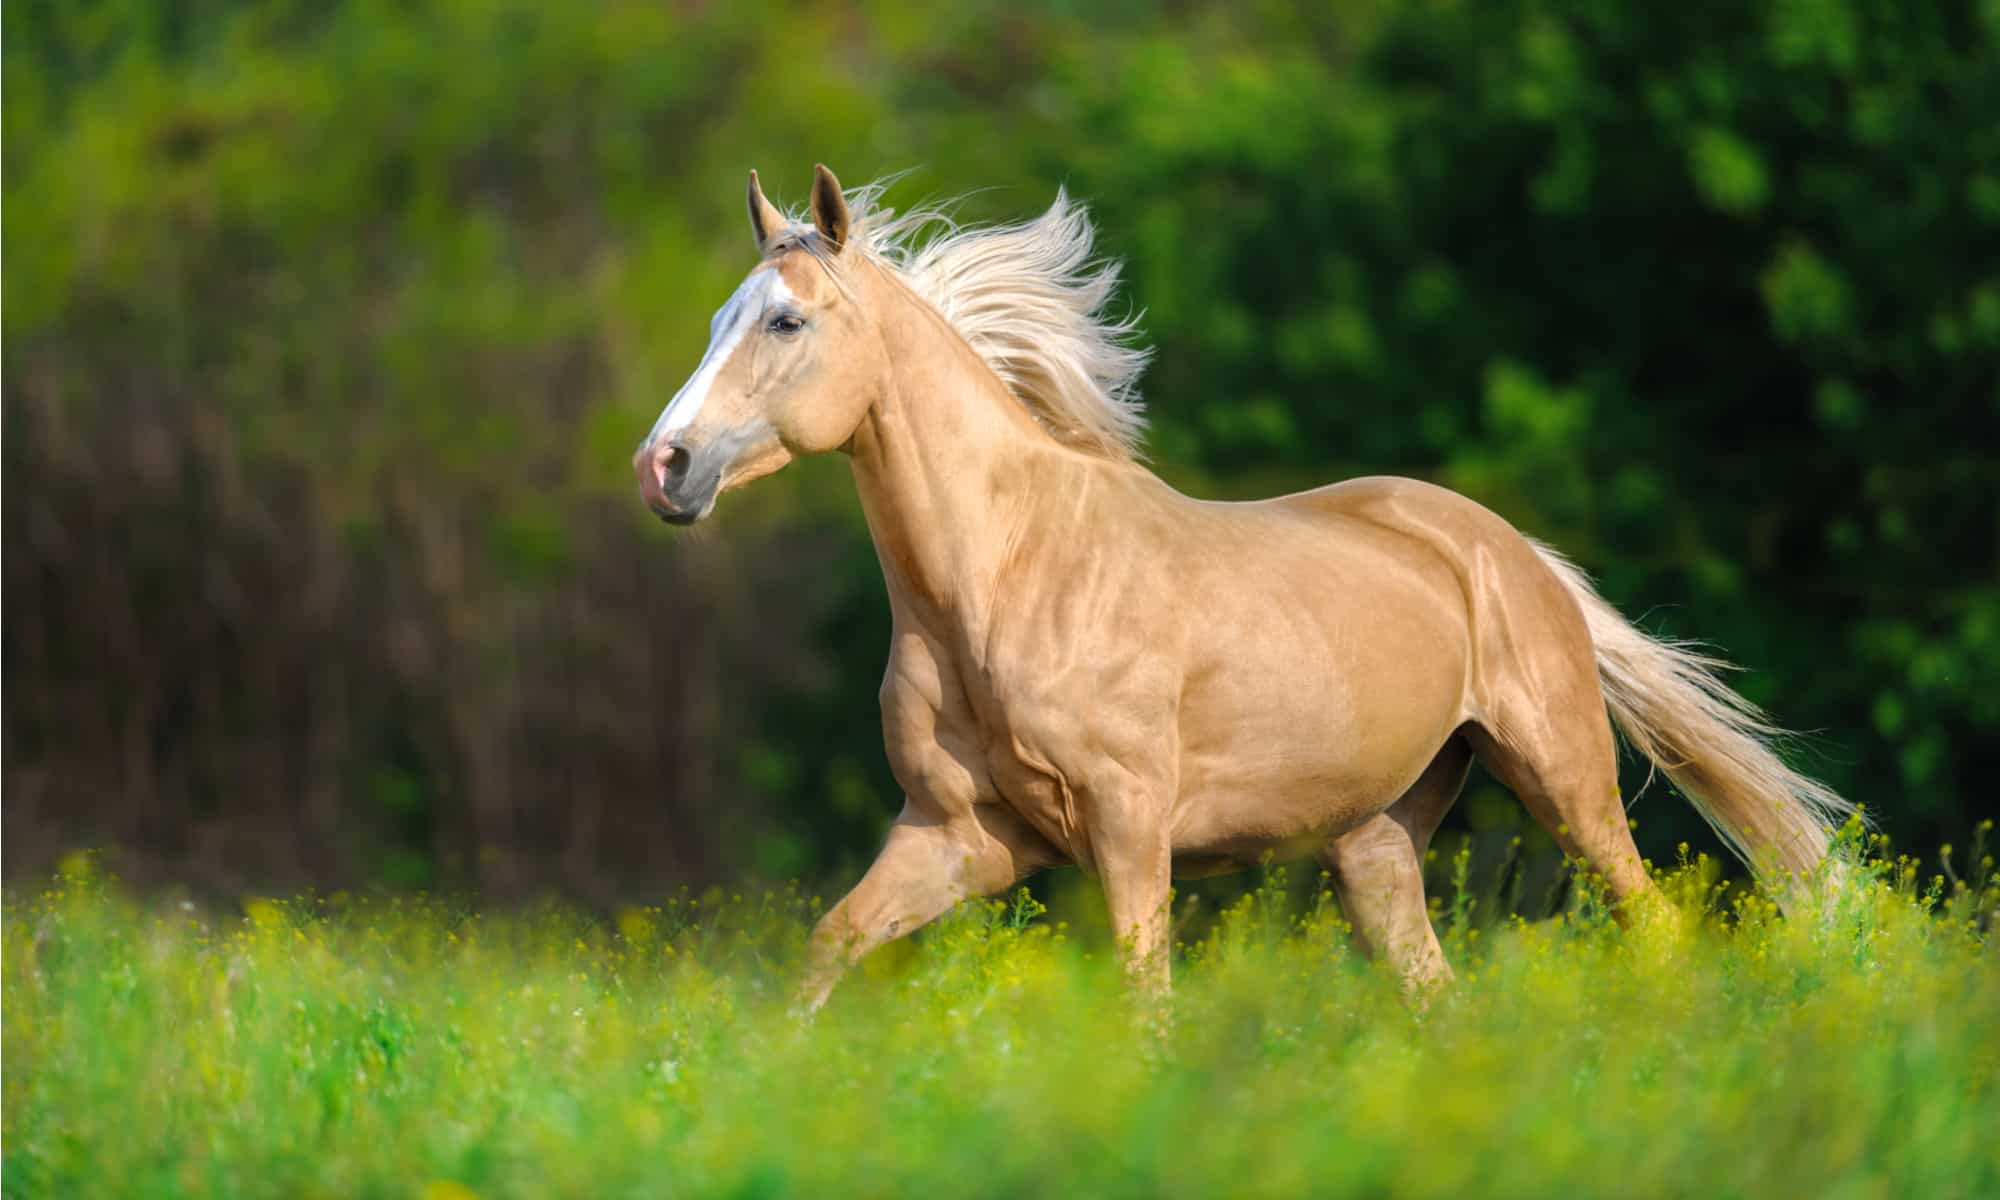 Horse with long blond mane run on spring field.